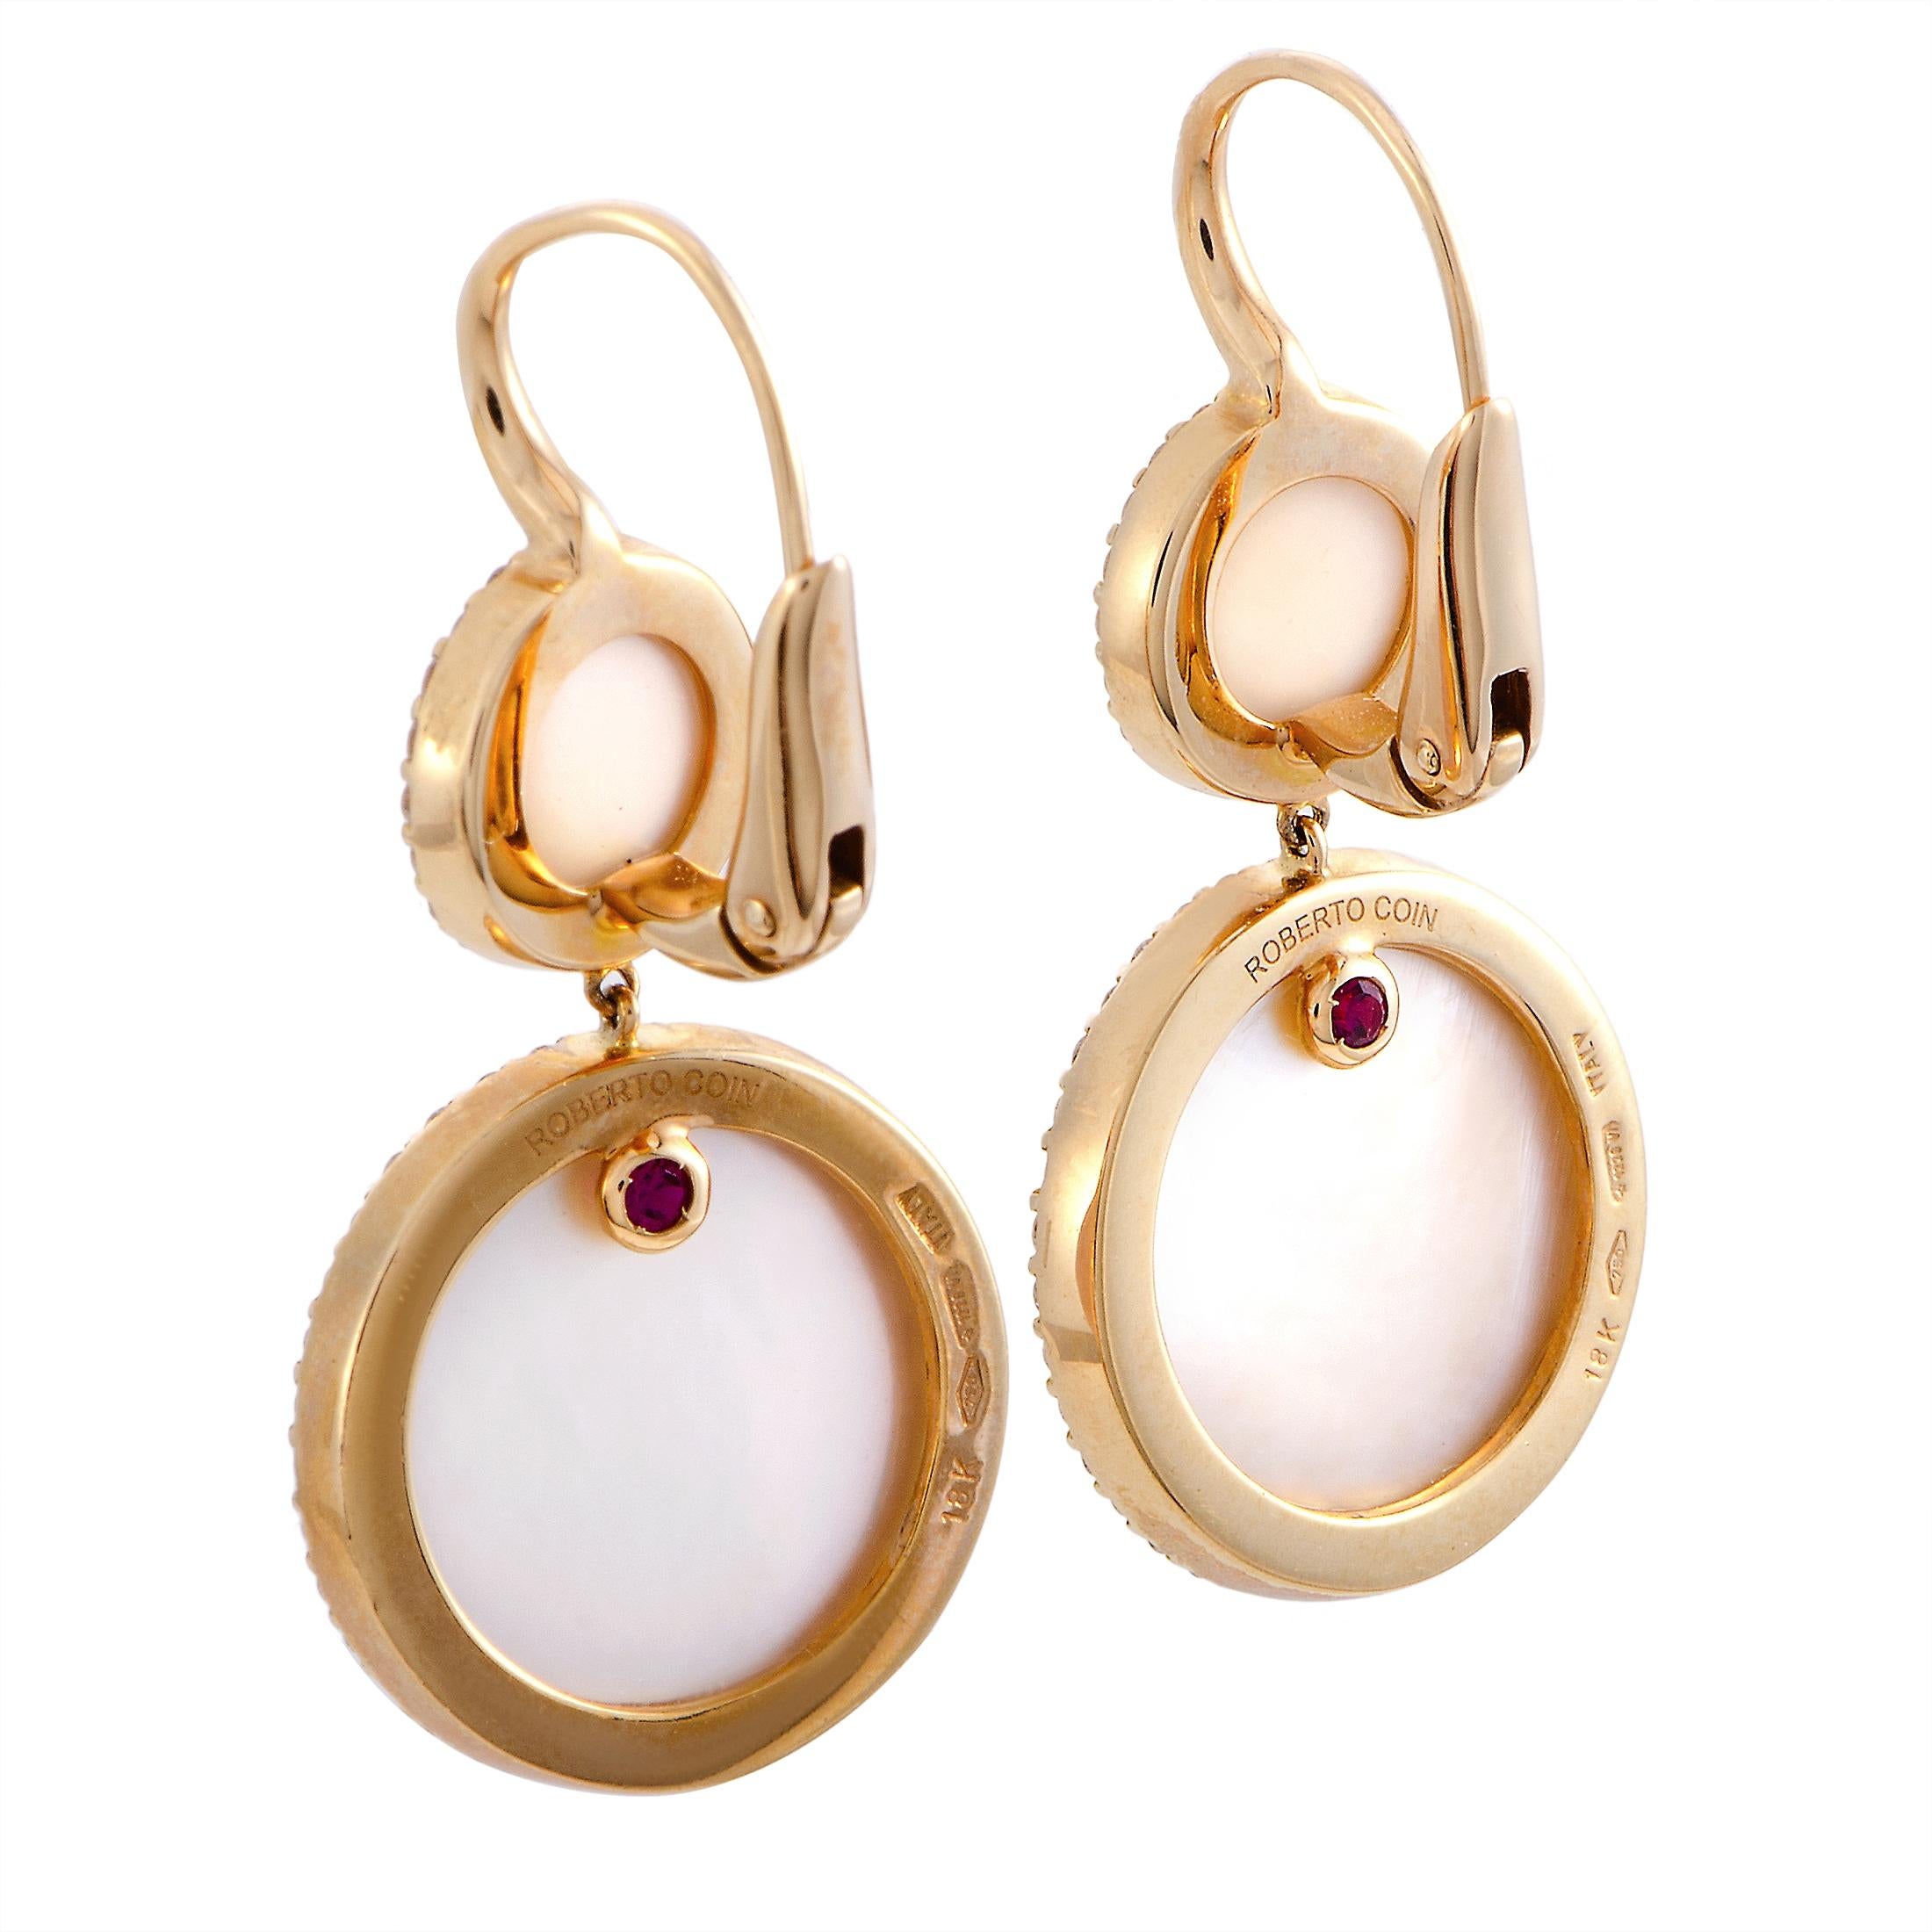 These Roberto Coin earrings are crafted from 18K rose gold and each weighs 7.5 grams, measuring 1.50” in length and 0.55” in width. The earrings are set with pink quartz and a total of 1.10 carats of diamonds.

Offered in brand new condition, this